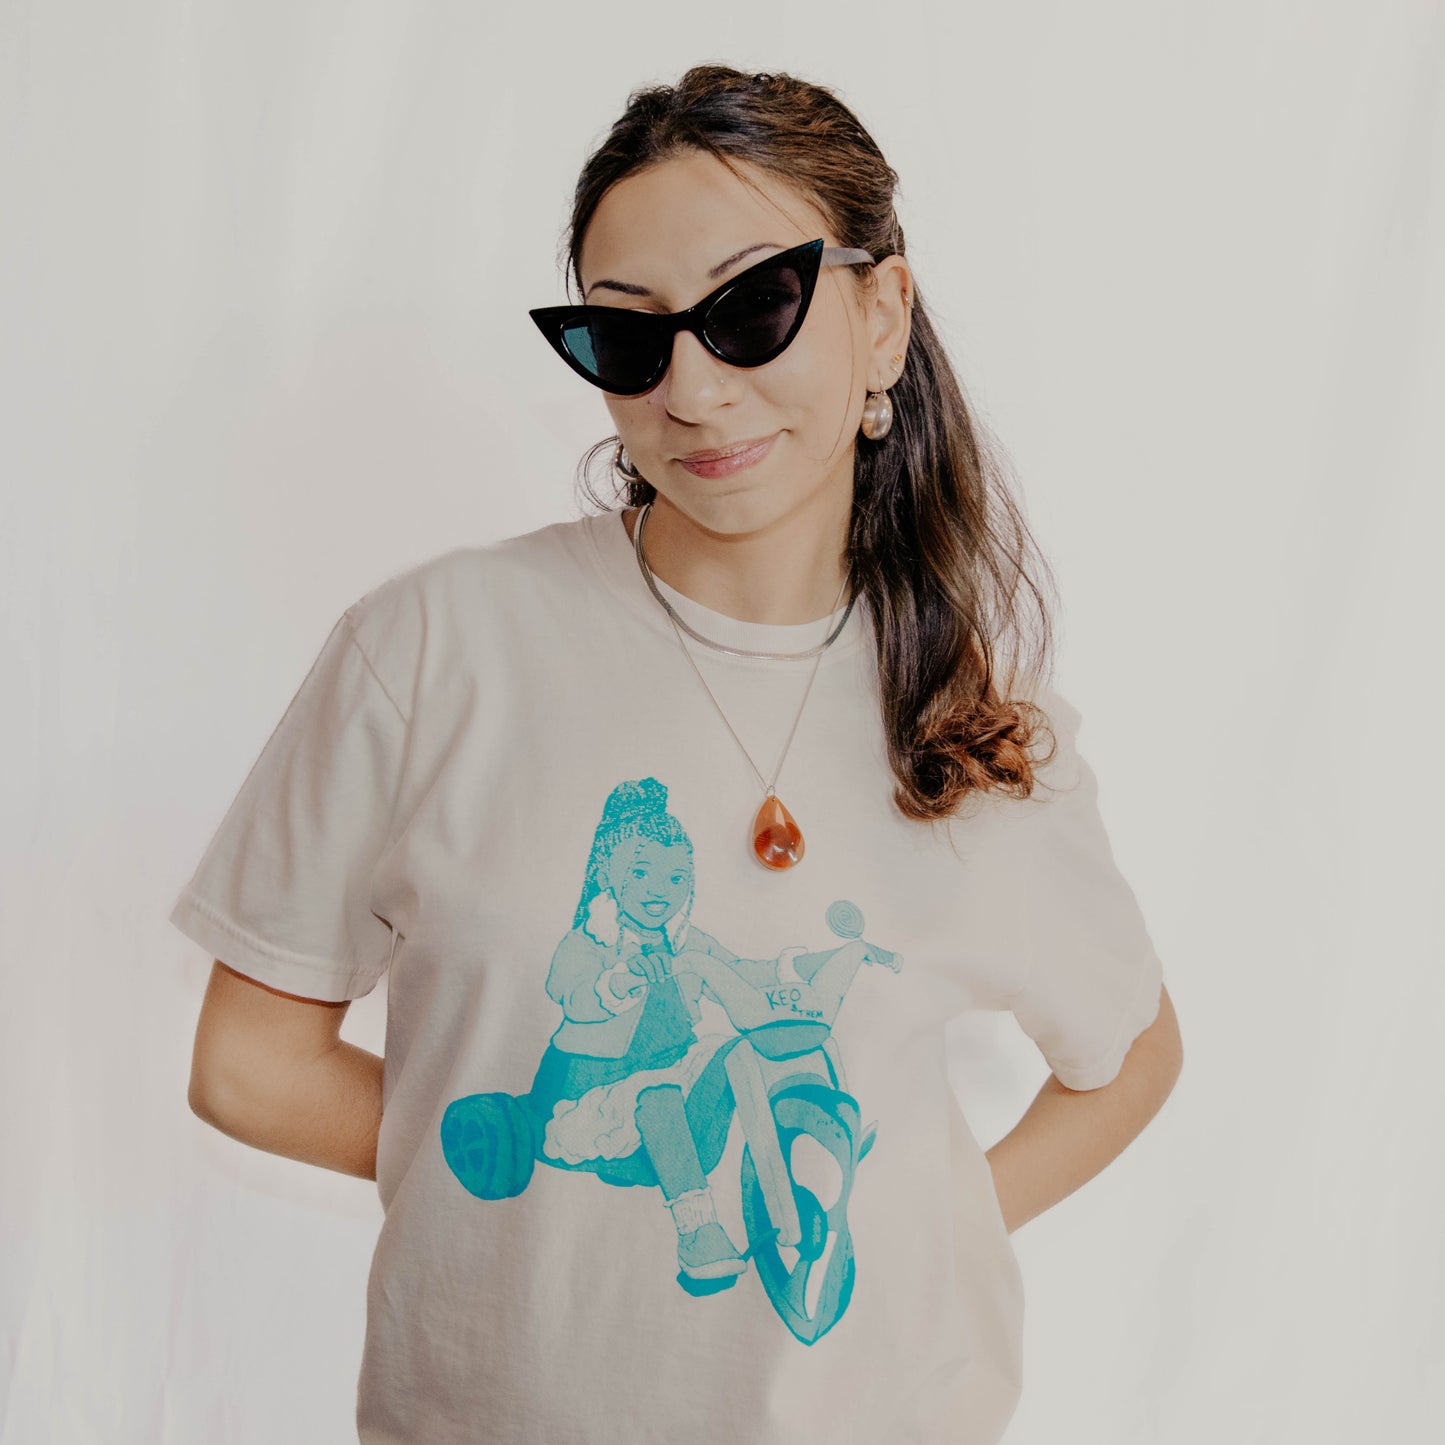 Money Grooves - Tricycle T-Shirt - Beige w/ Turquoise